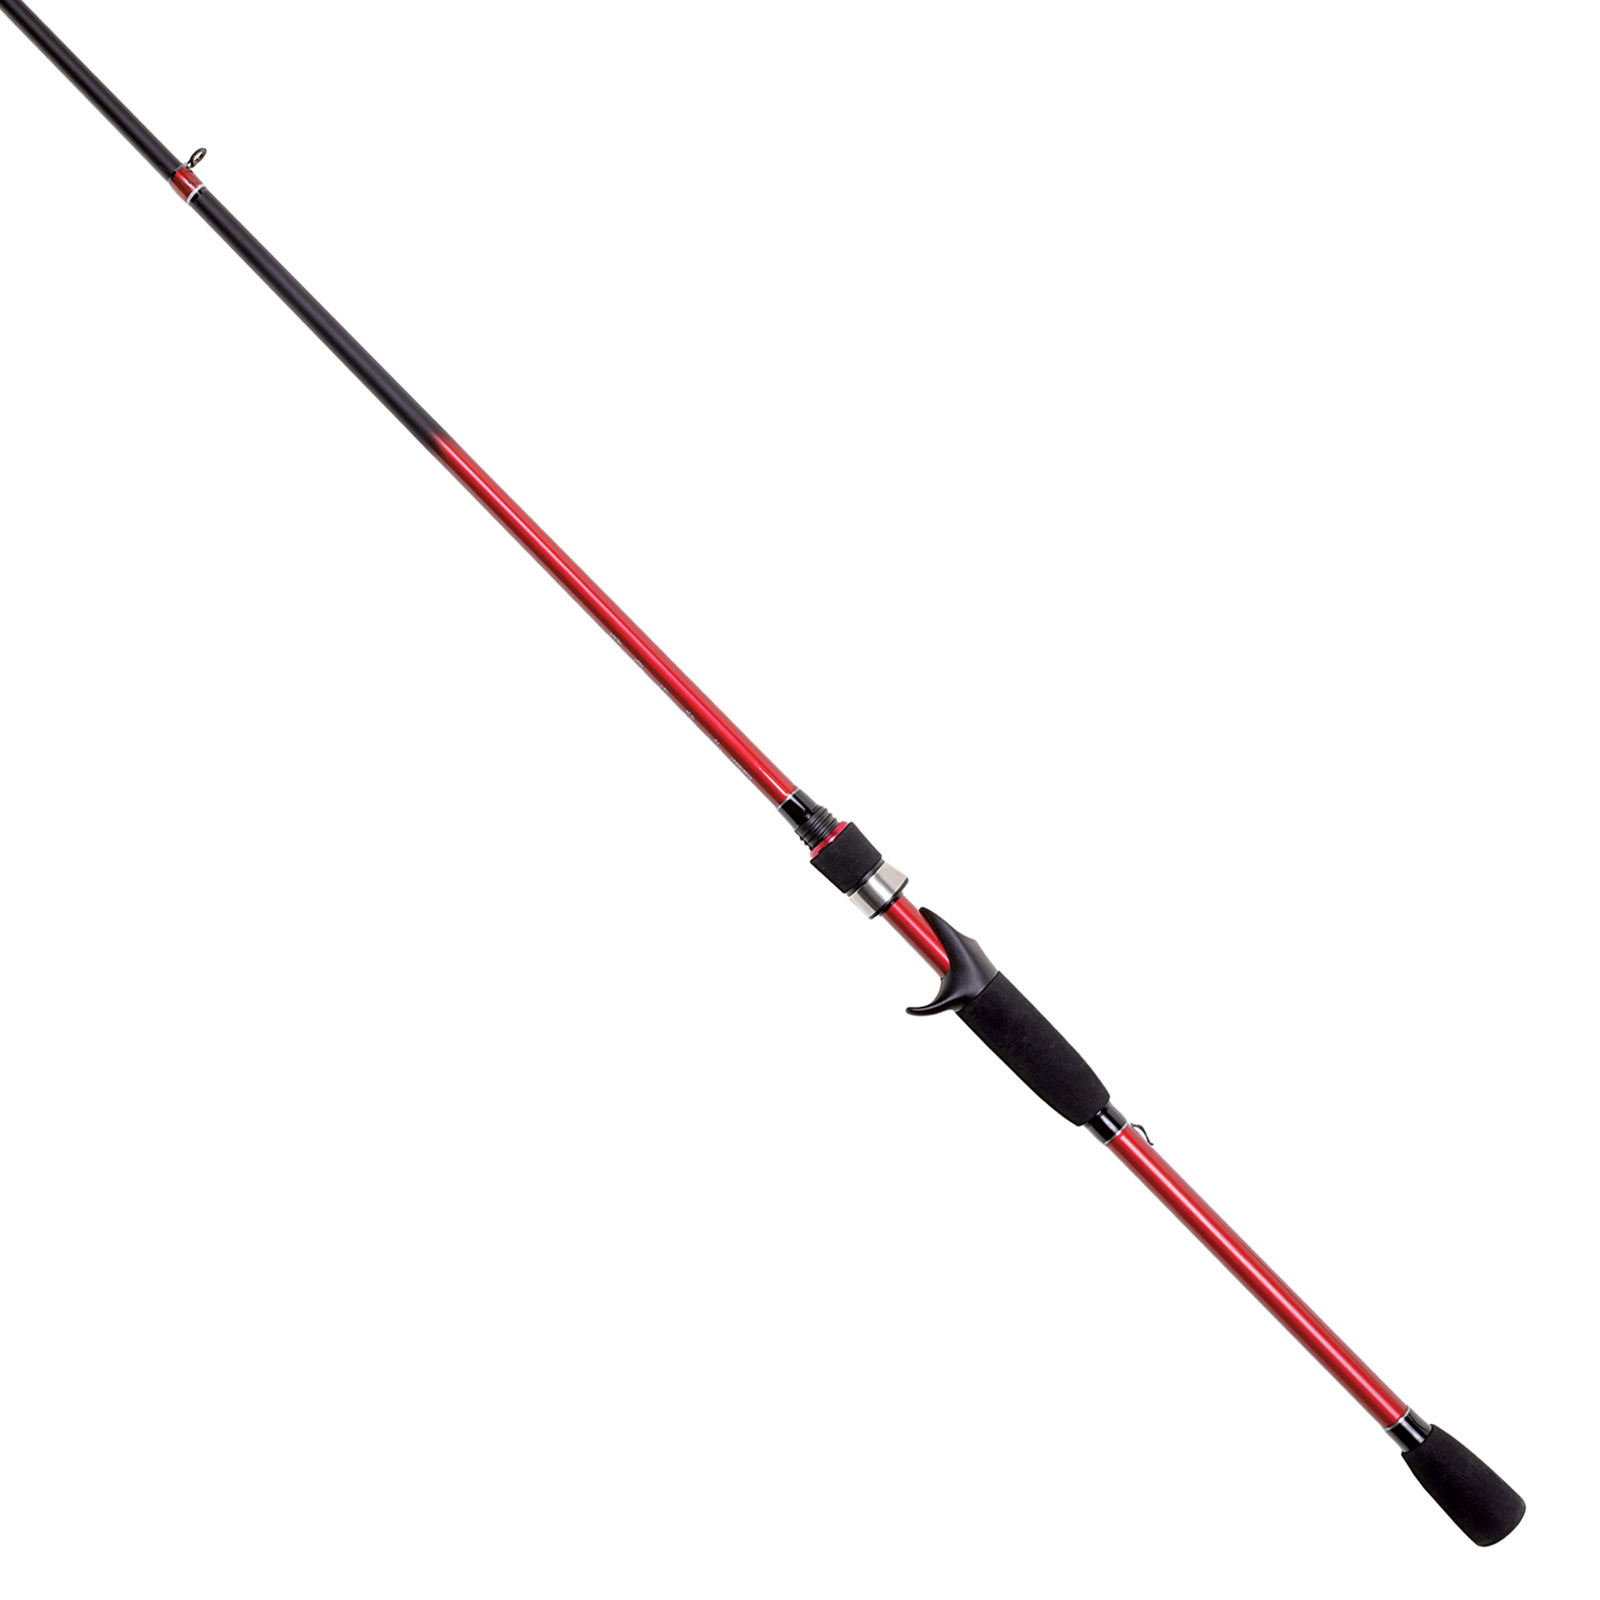 https://op2.0ps.us/original/opplanet-eagle-claw-ec2-5-bass-rod-heavy-fast-casting-for-jig-worm-74-ec2b74hfc1-main